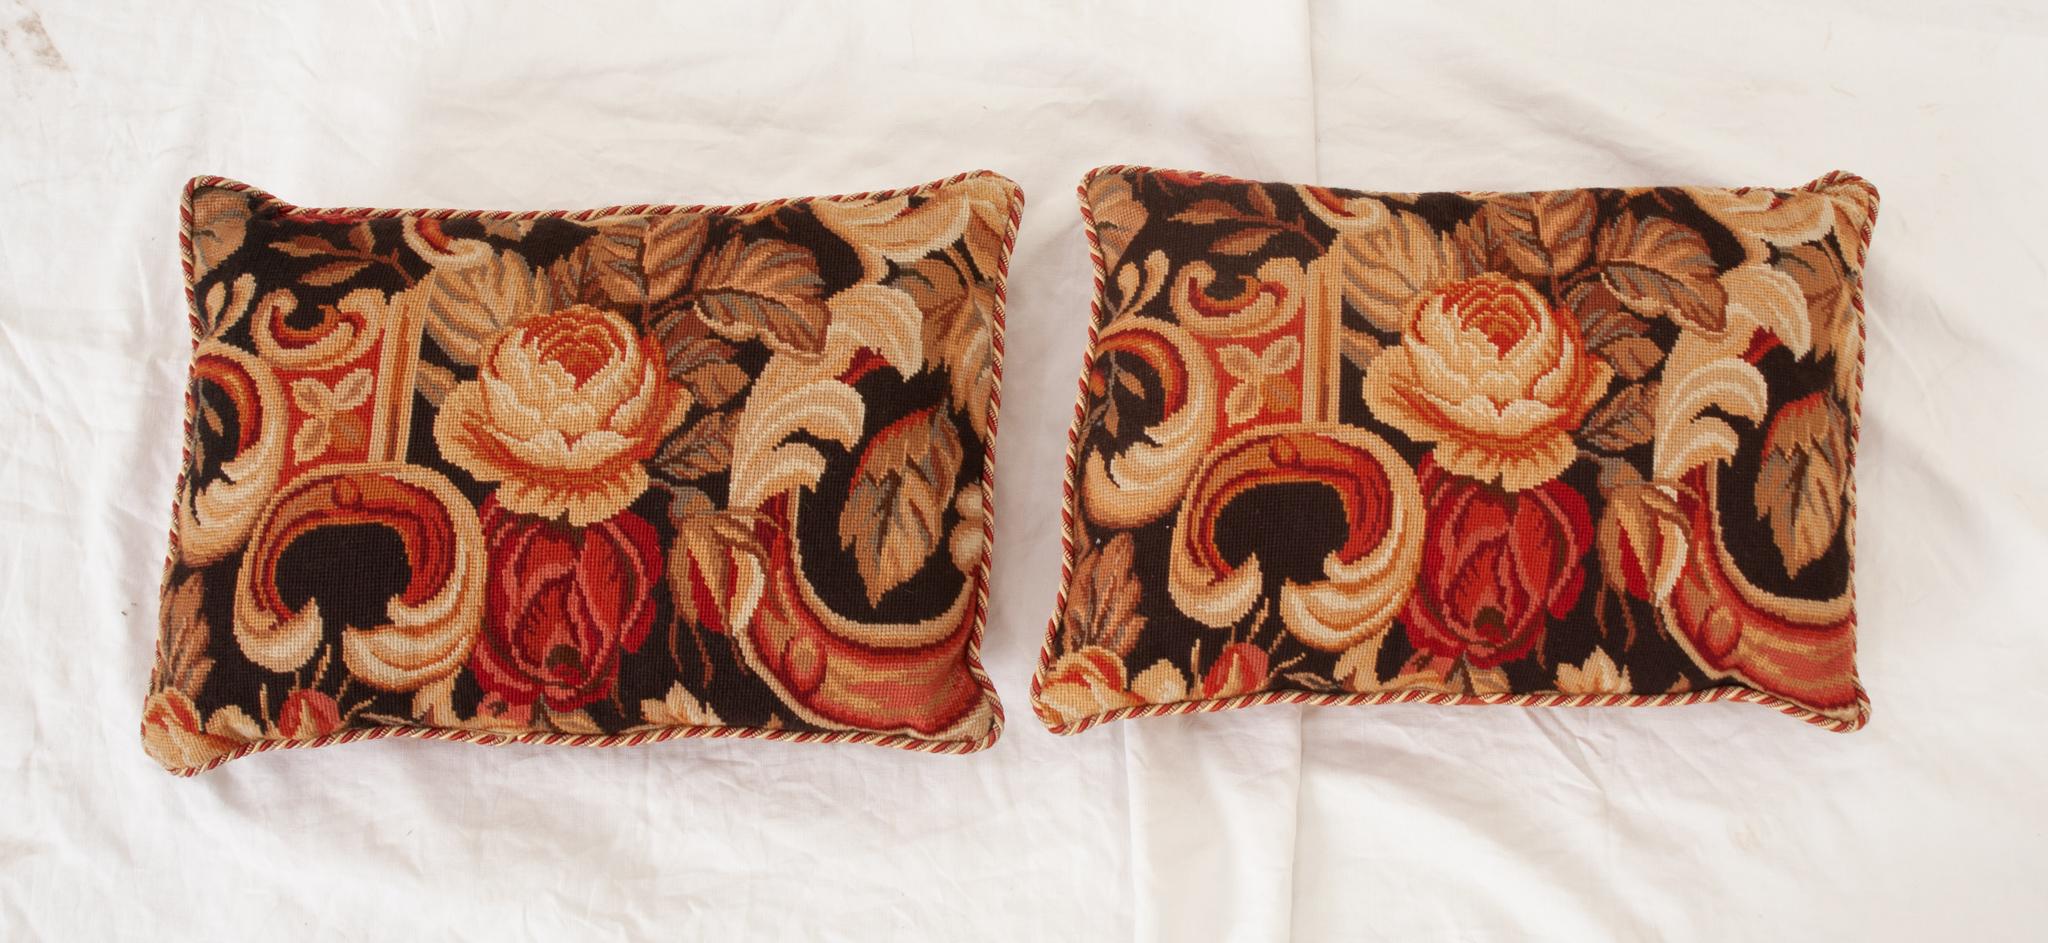  A vintage pair of needlepoint pillows are in great shape. All handmade with flowers and braided trim. The pillow cases have inset zippers and the pillow insert can be removed. Be sure to view the detailed images.